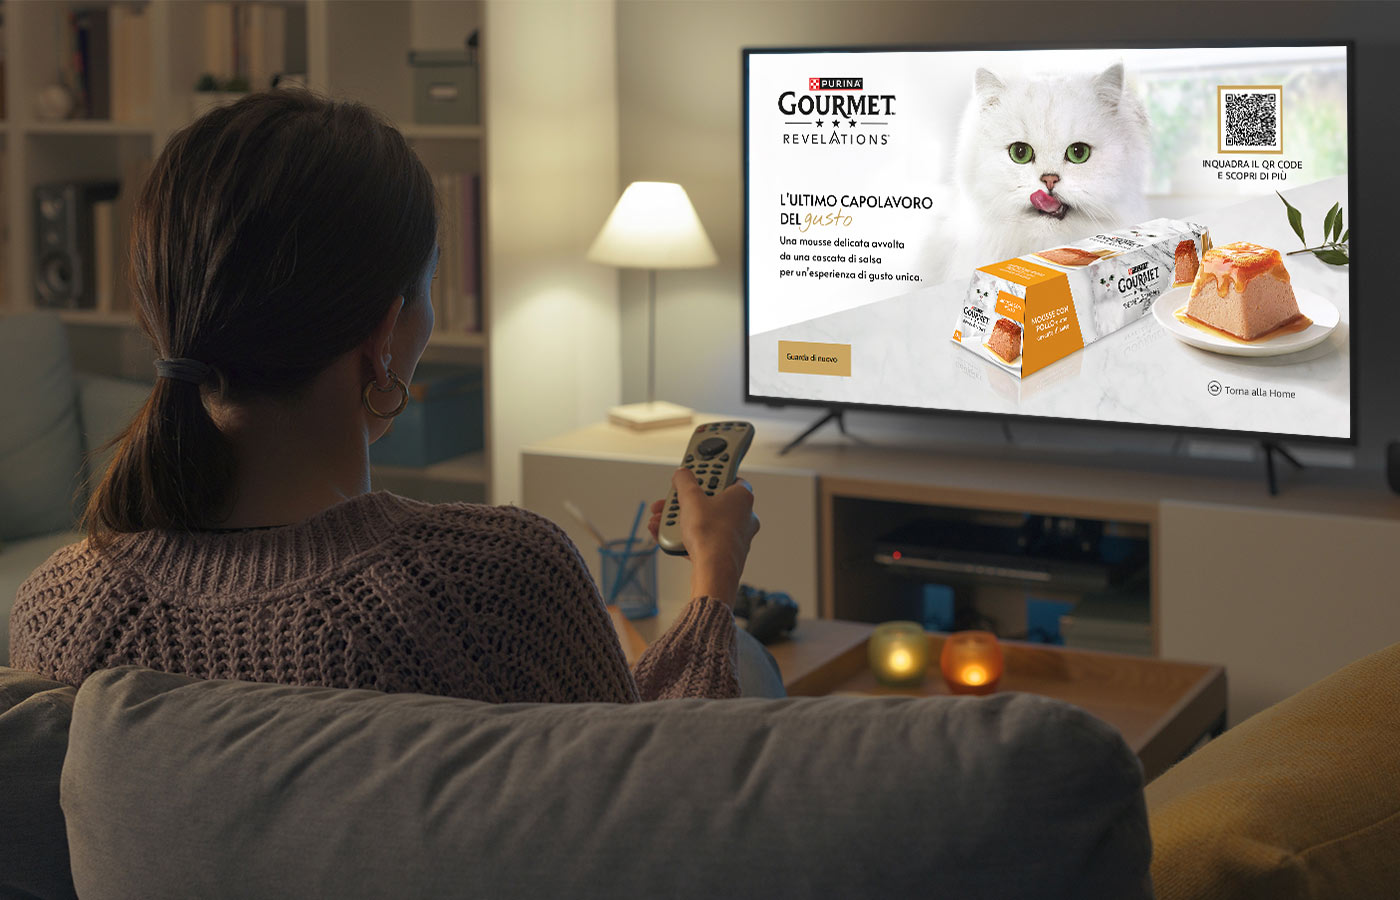 Example of a banner created by ATC for the Gourmet Revelations campaign on Fire TV